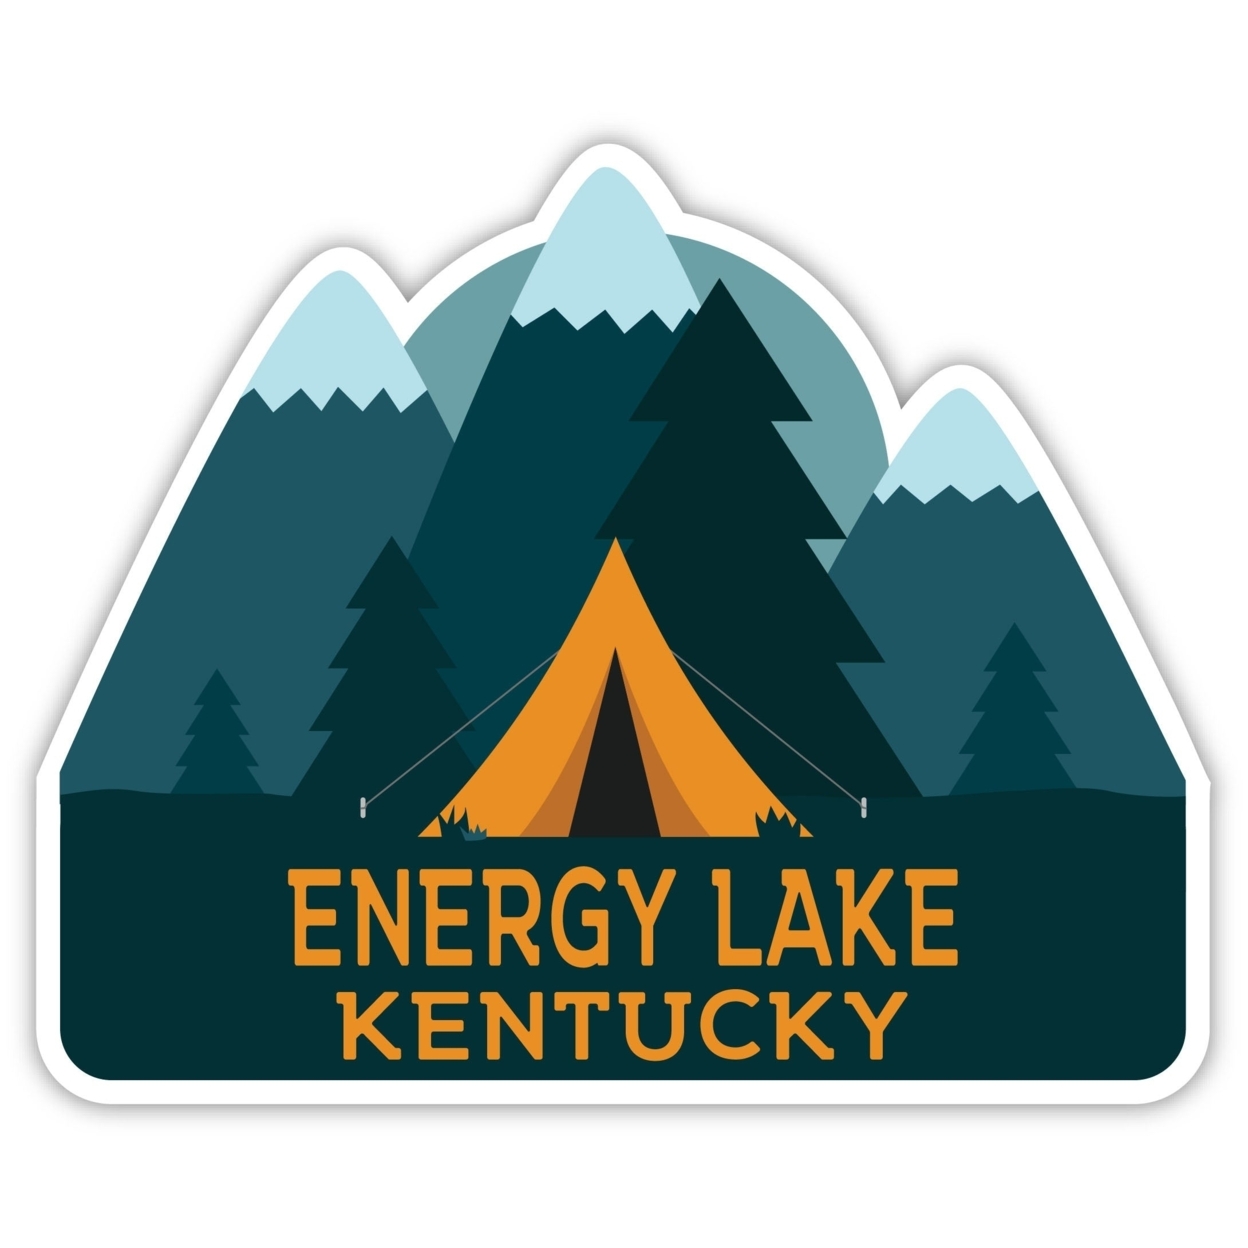 Energy Lake Kentucky Souvenir Decorative Stickers (Choose Theme And Size) - 4-Pack, 4-Inch, Tent